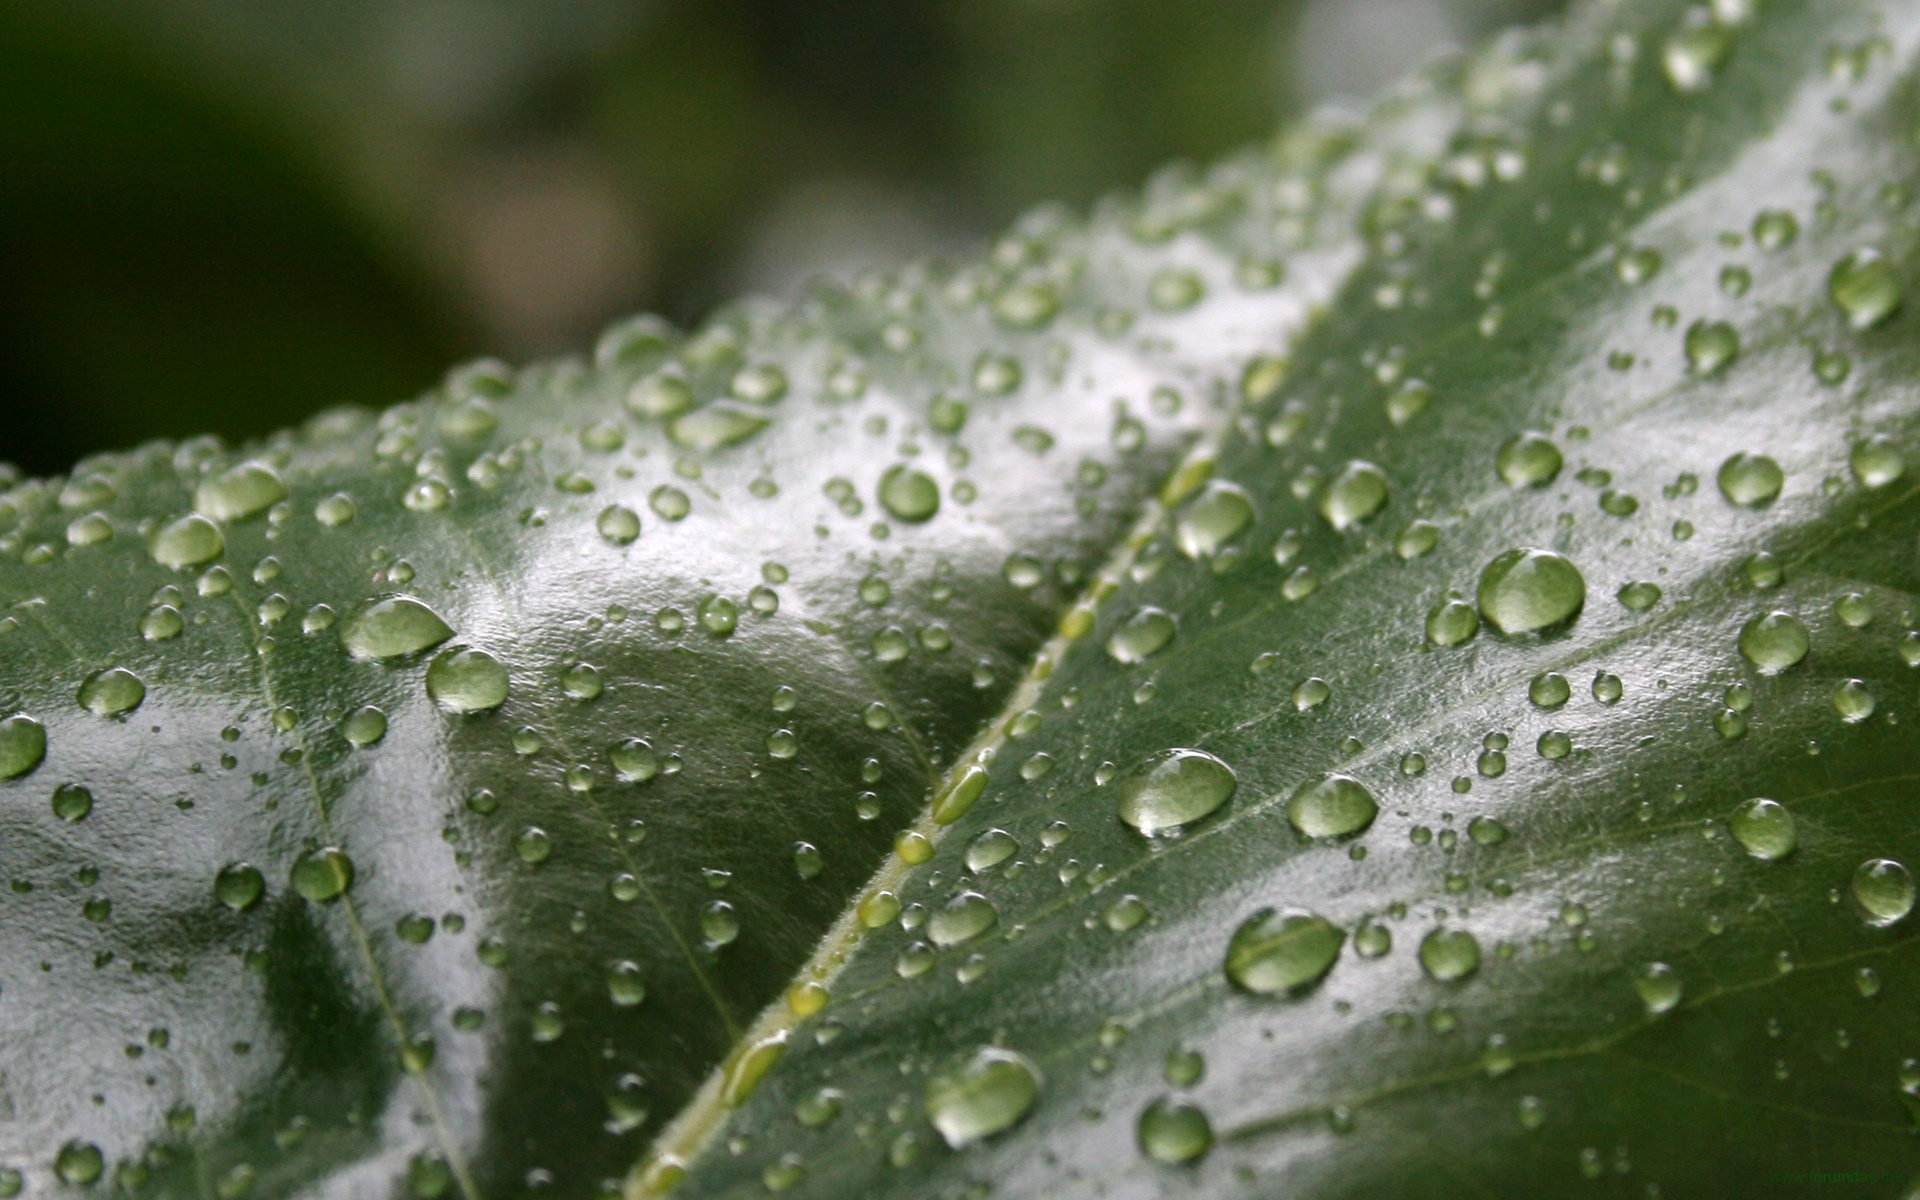 Download wallpaper for 1366x768 resolution | Leaves Leaf Water Drop ...